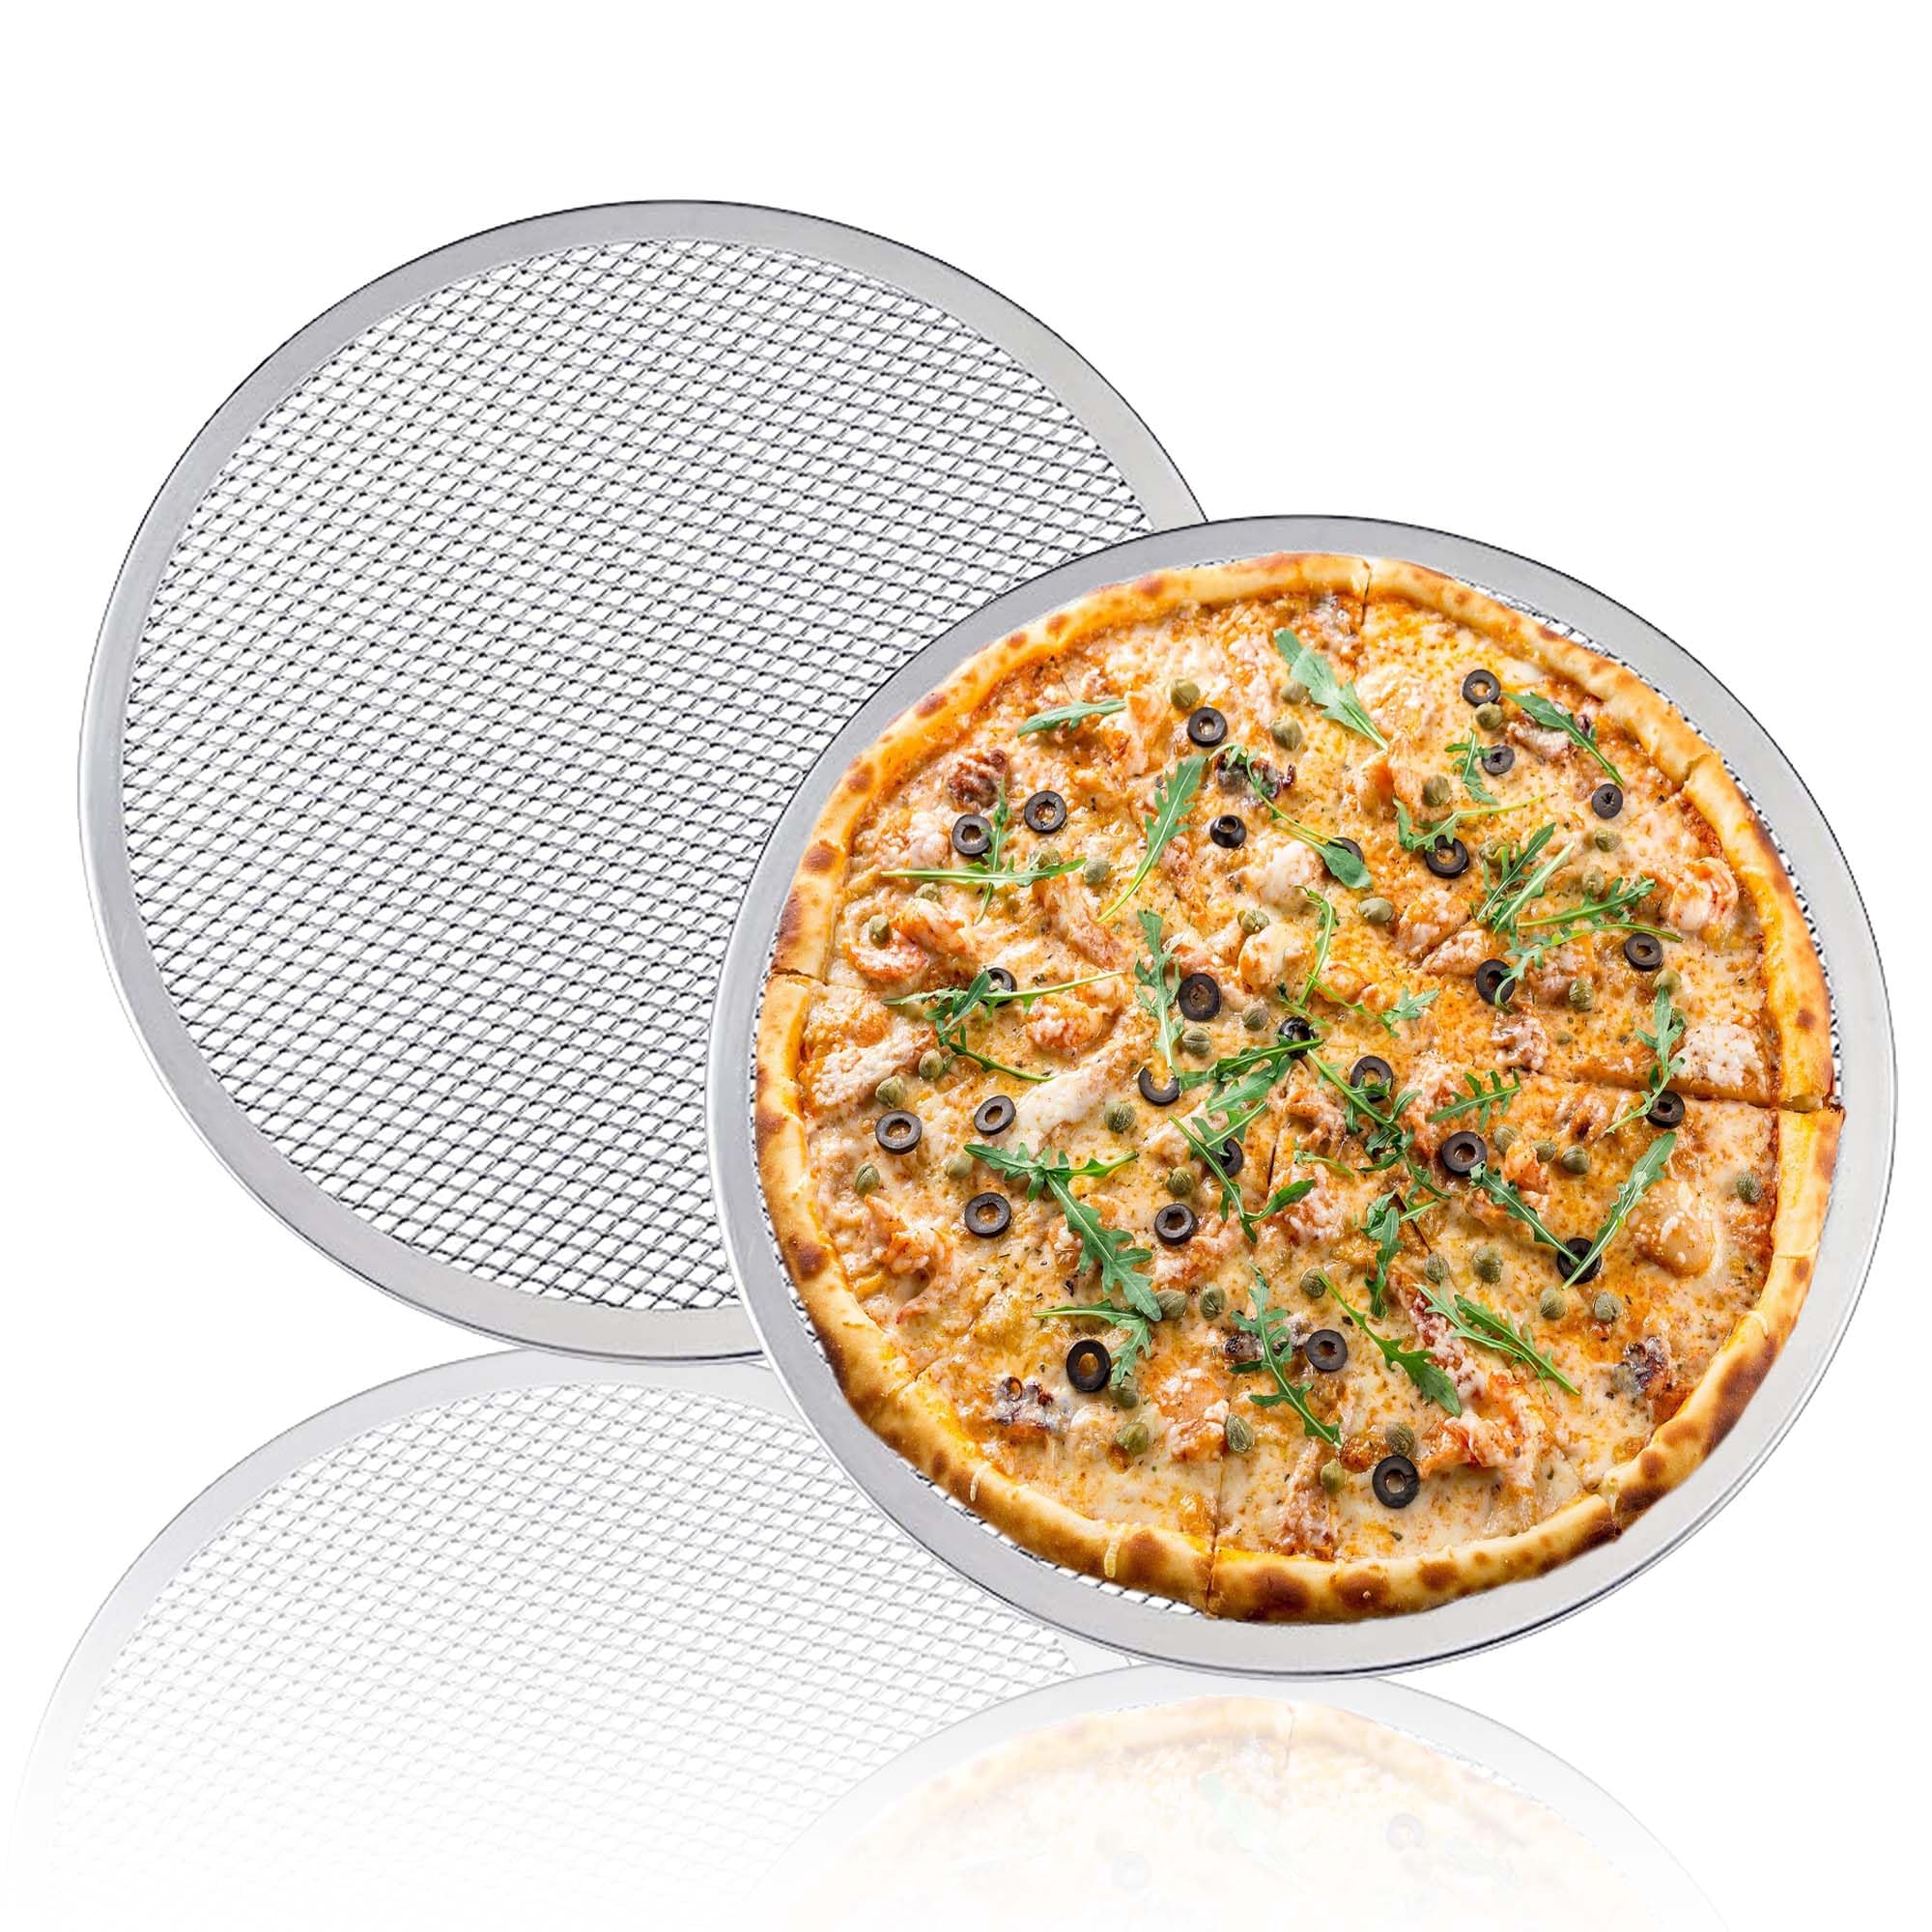 YEUIKERR 2 Pack Pizza Screen,12 Inch Non-Stick Bakeware Baking Screen, Aluminum Pizza Pan with Holes Pizza Mesh, Seamless